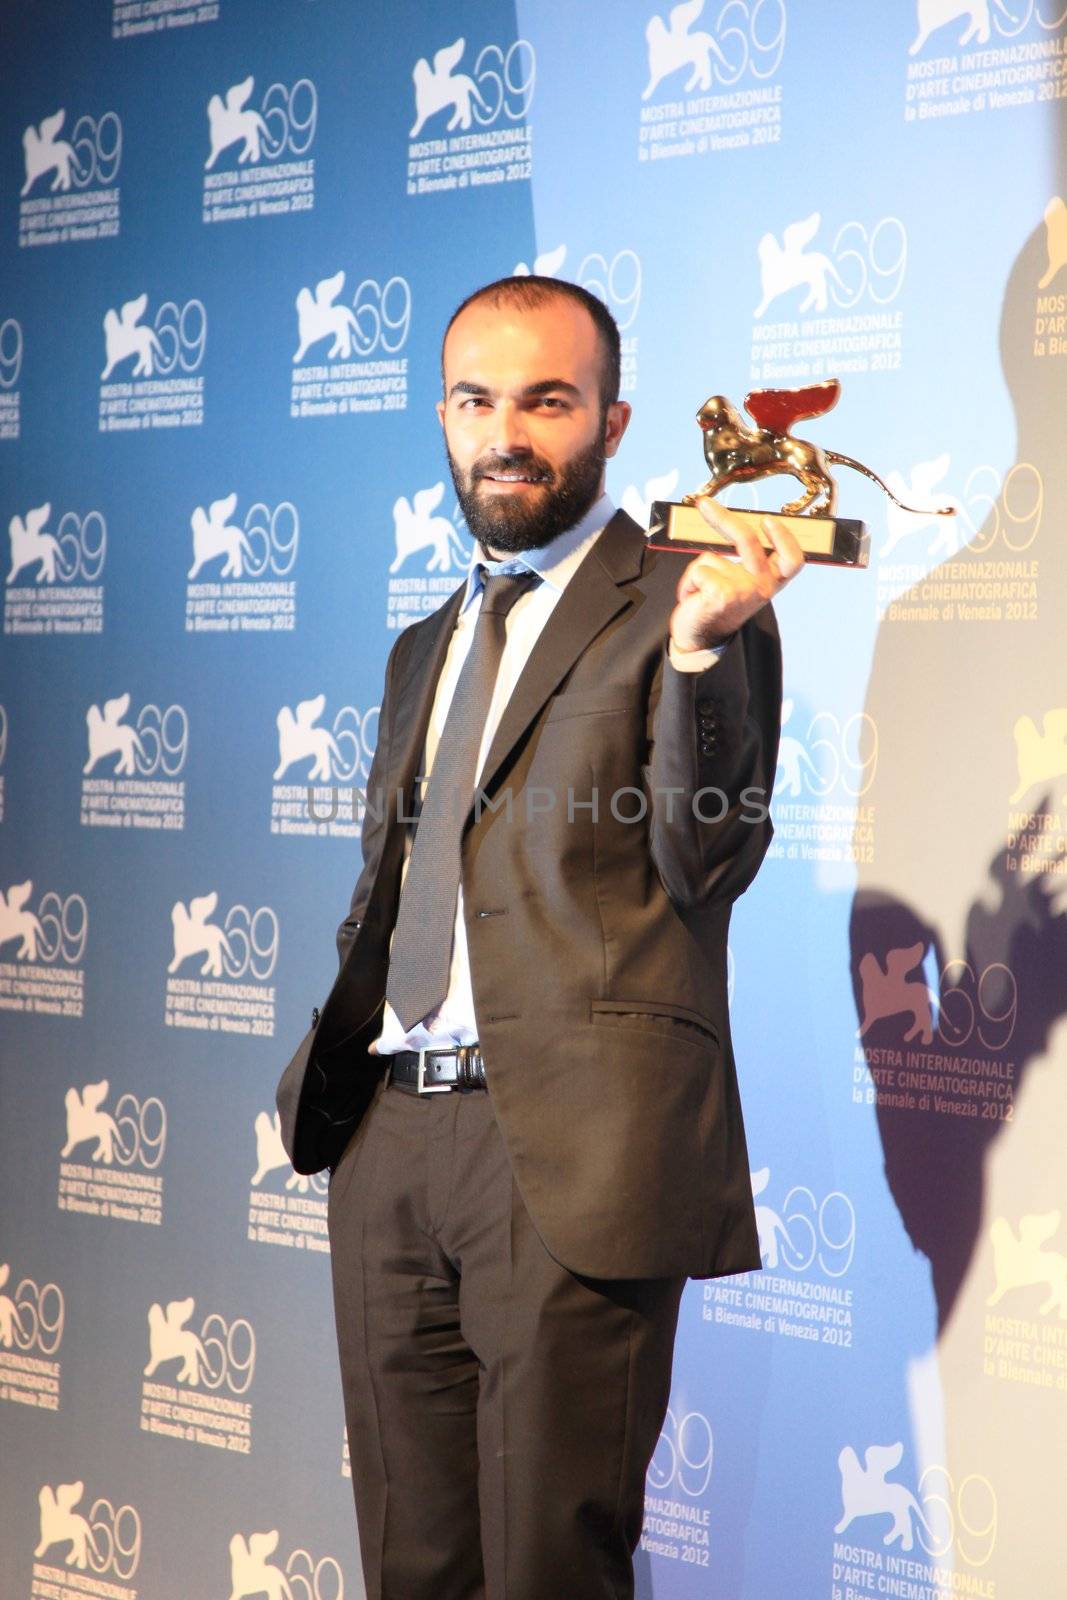 Ali Aydin poses for photographers at 69th Venice Film Festival